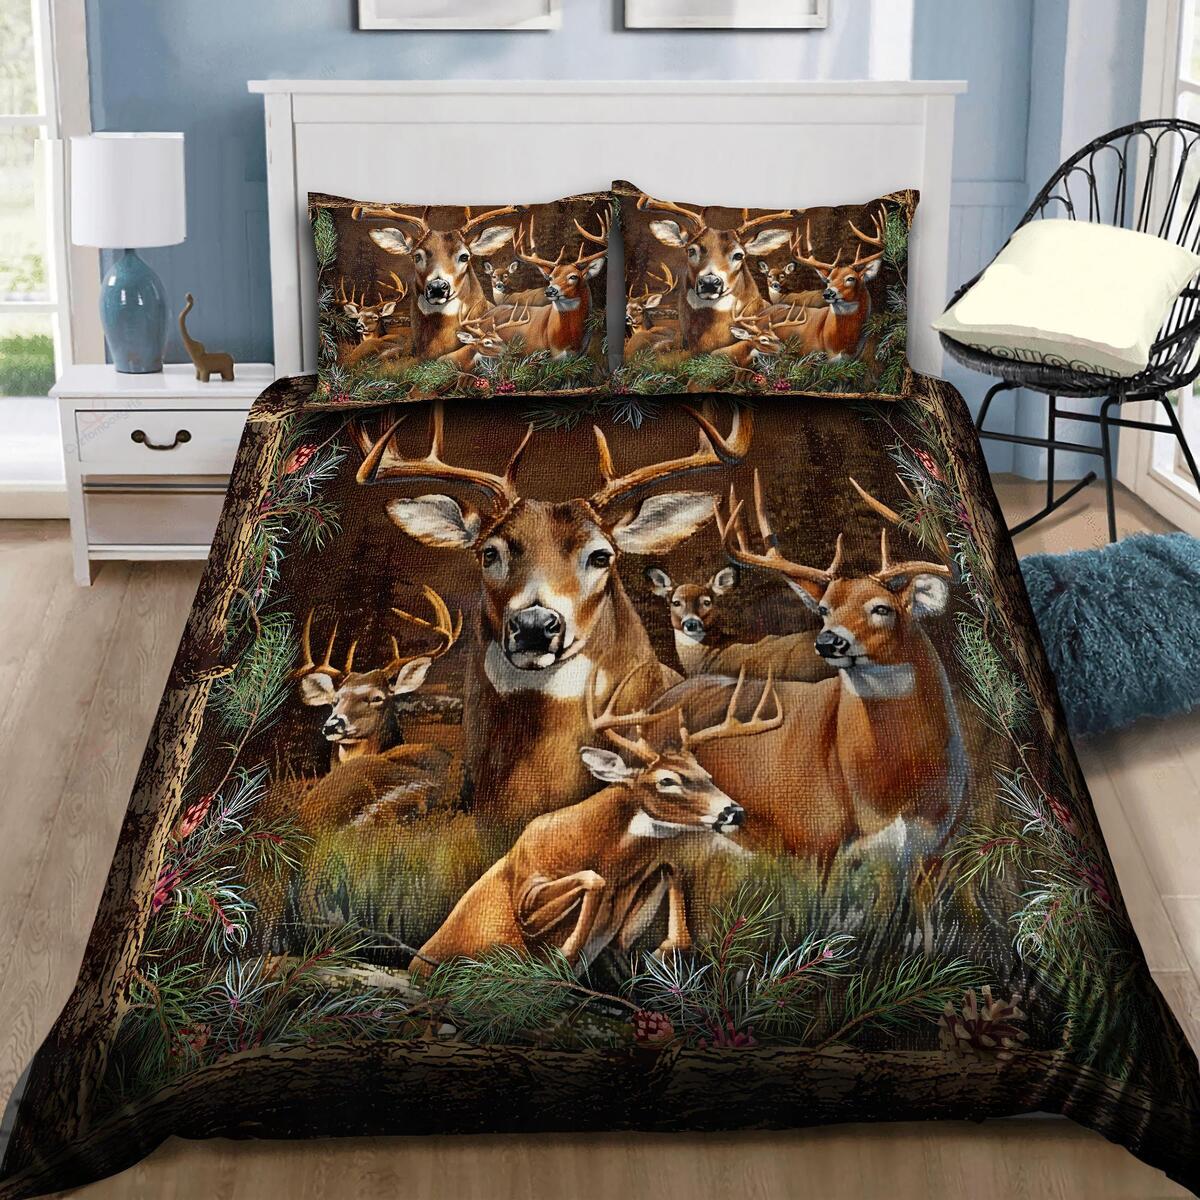 Deer Family In The Forest Quilt Bedding Set - Deer Hunting Camo Quilt Bed Set To Mom Dad Wife Husband Kids Son Daughter